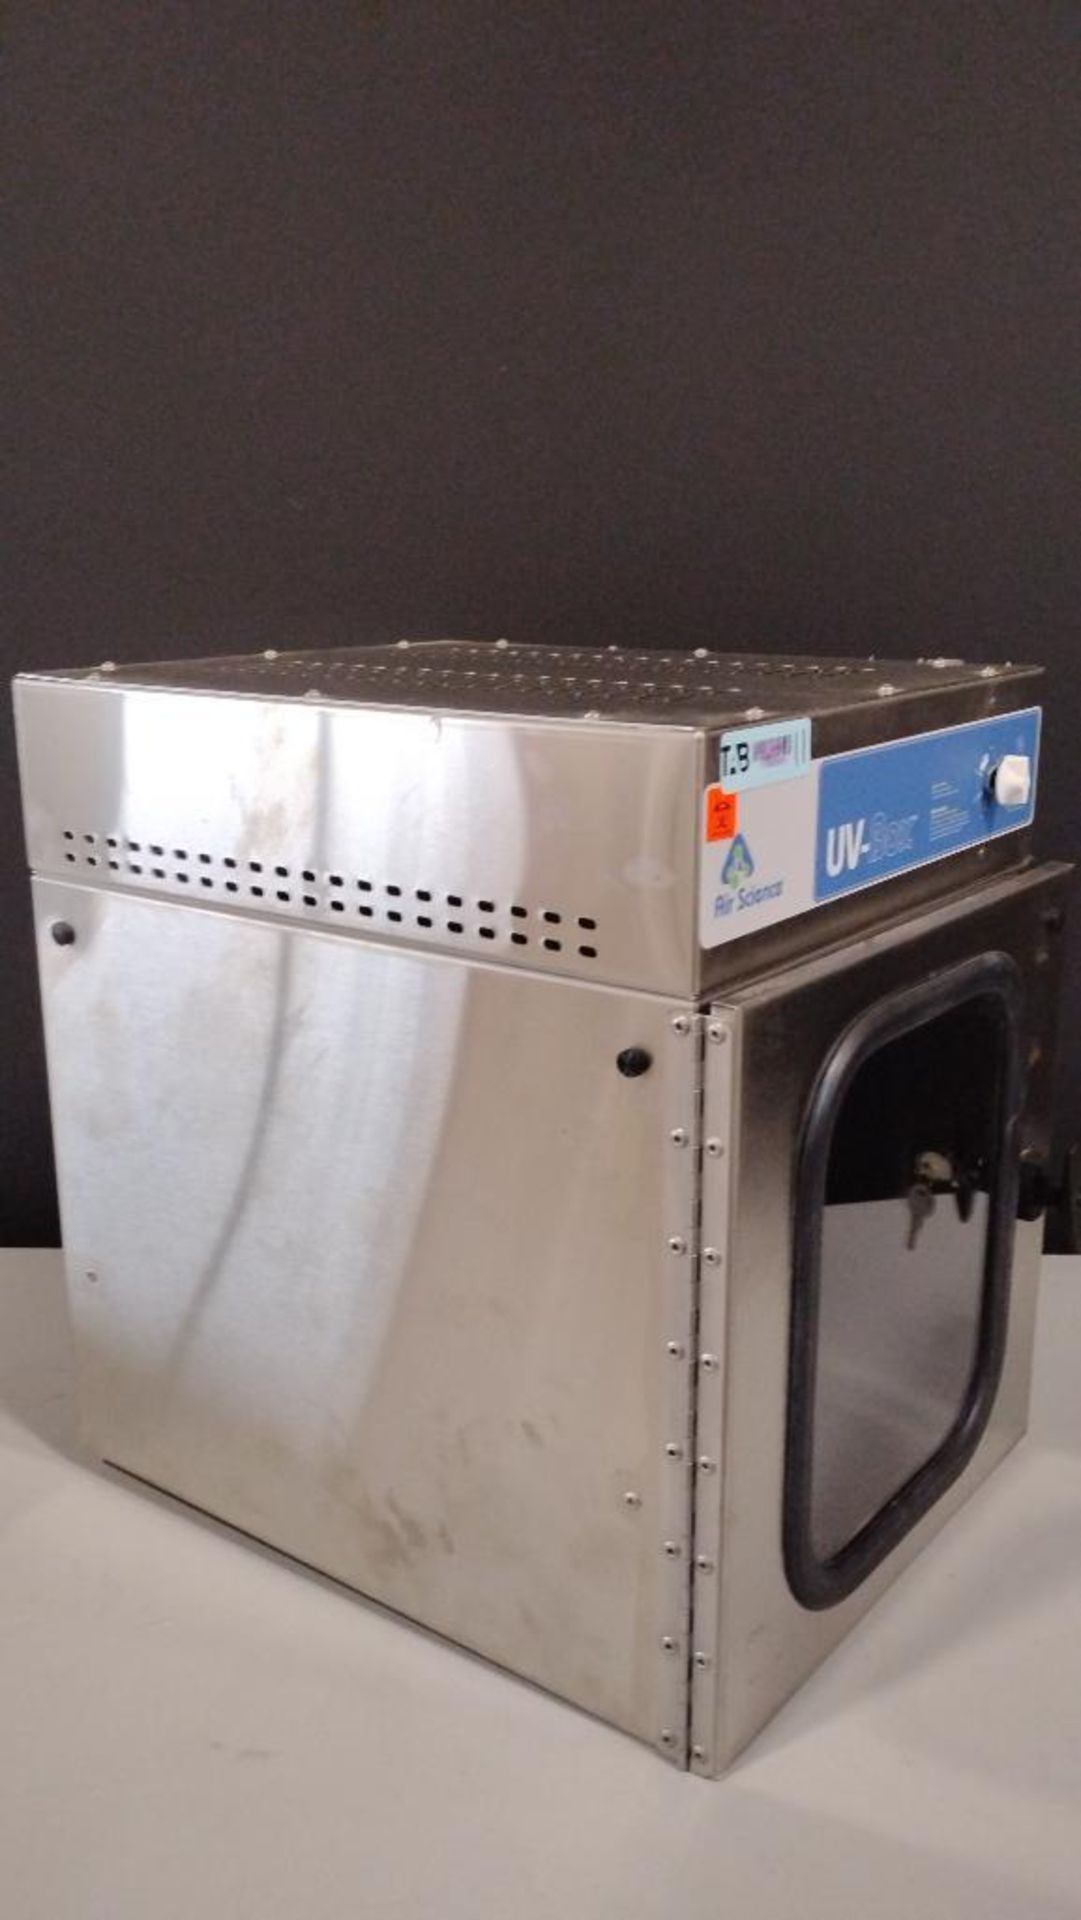 AIR SCIENCE UV-BOX WARMING CABINET - Image 4 of 5